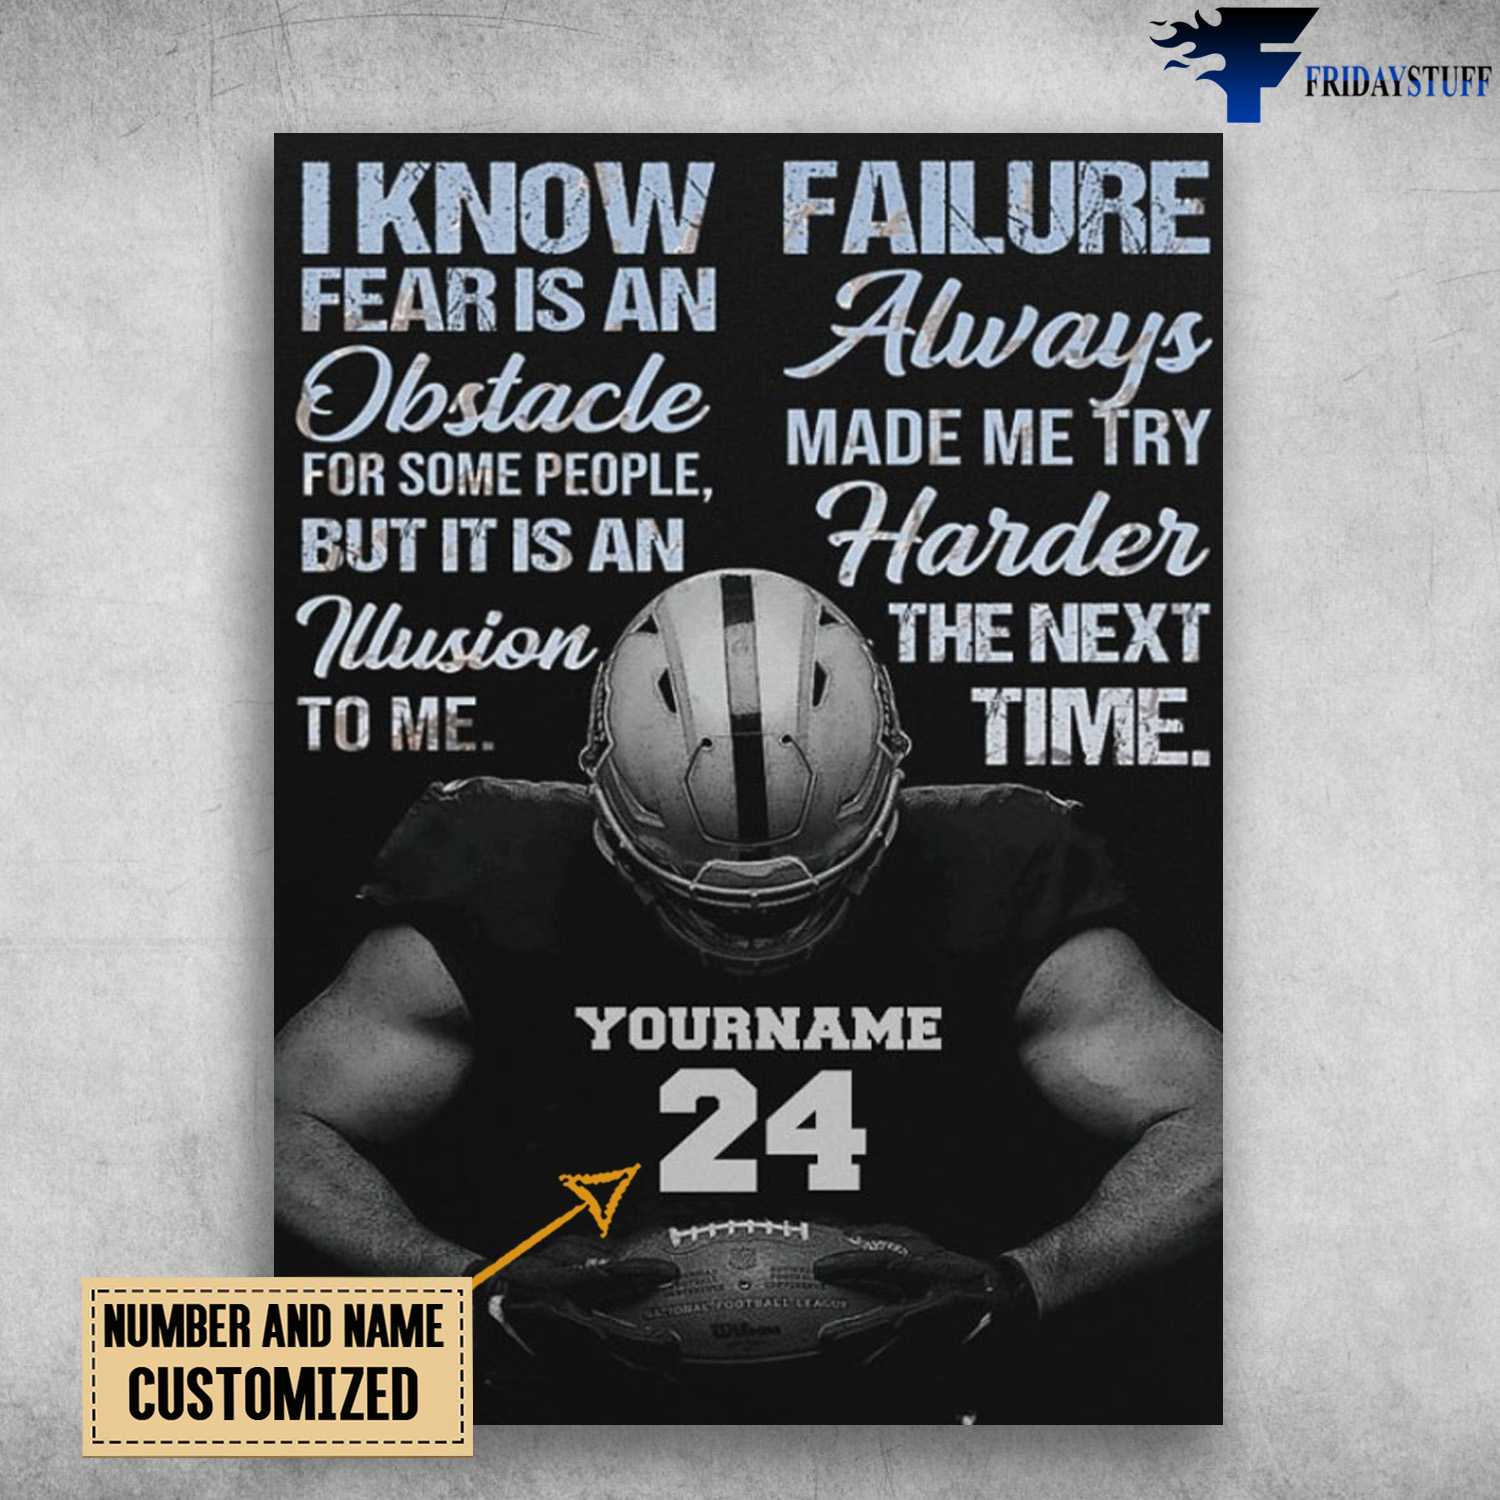 Football Player, Football Poster, I Know Fear Is An Obstacle For Some People, But It Is An Illustacle To Me, Failure Always Made Me Try Harder The Next Time